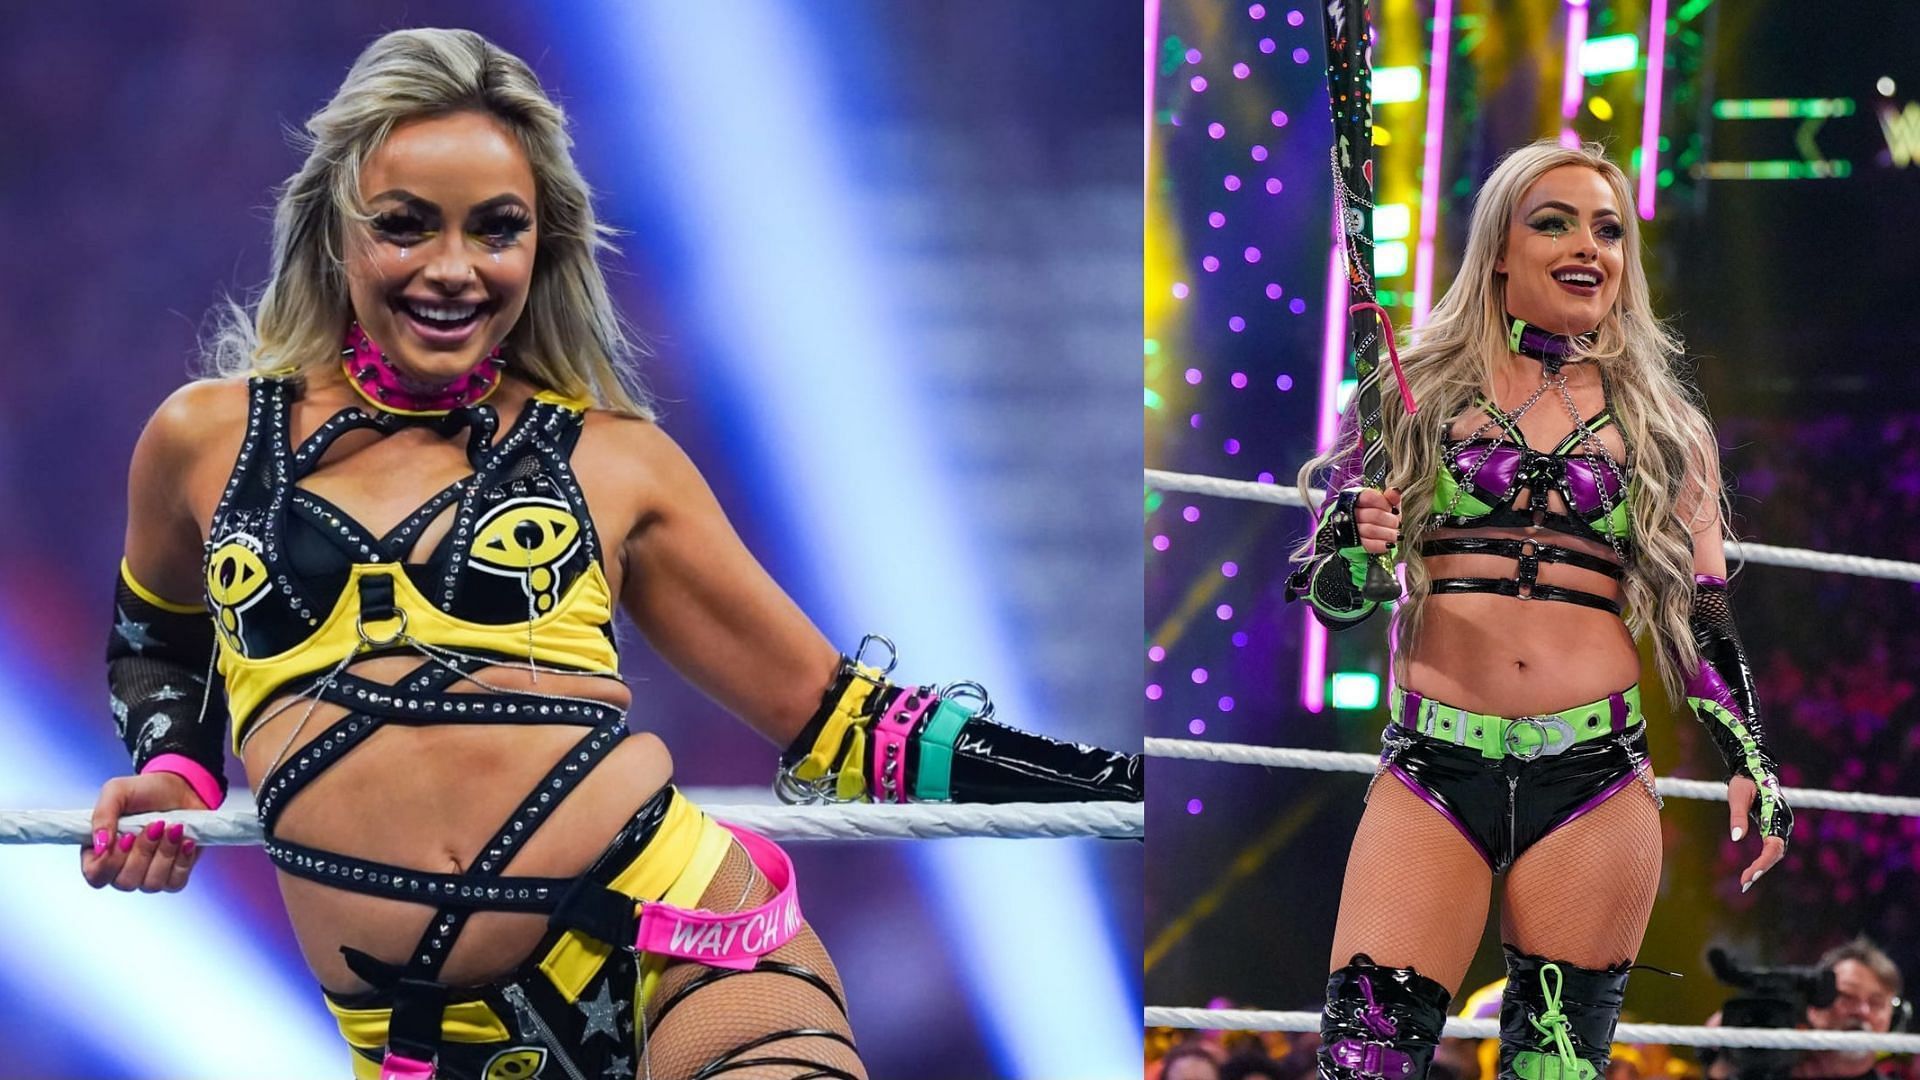 Liv Morgan suffered an injury from last week